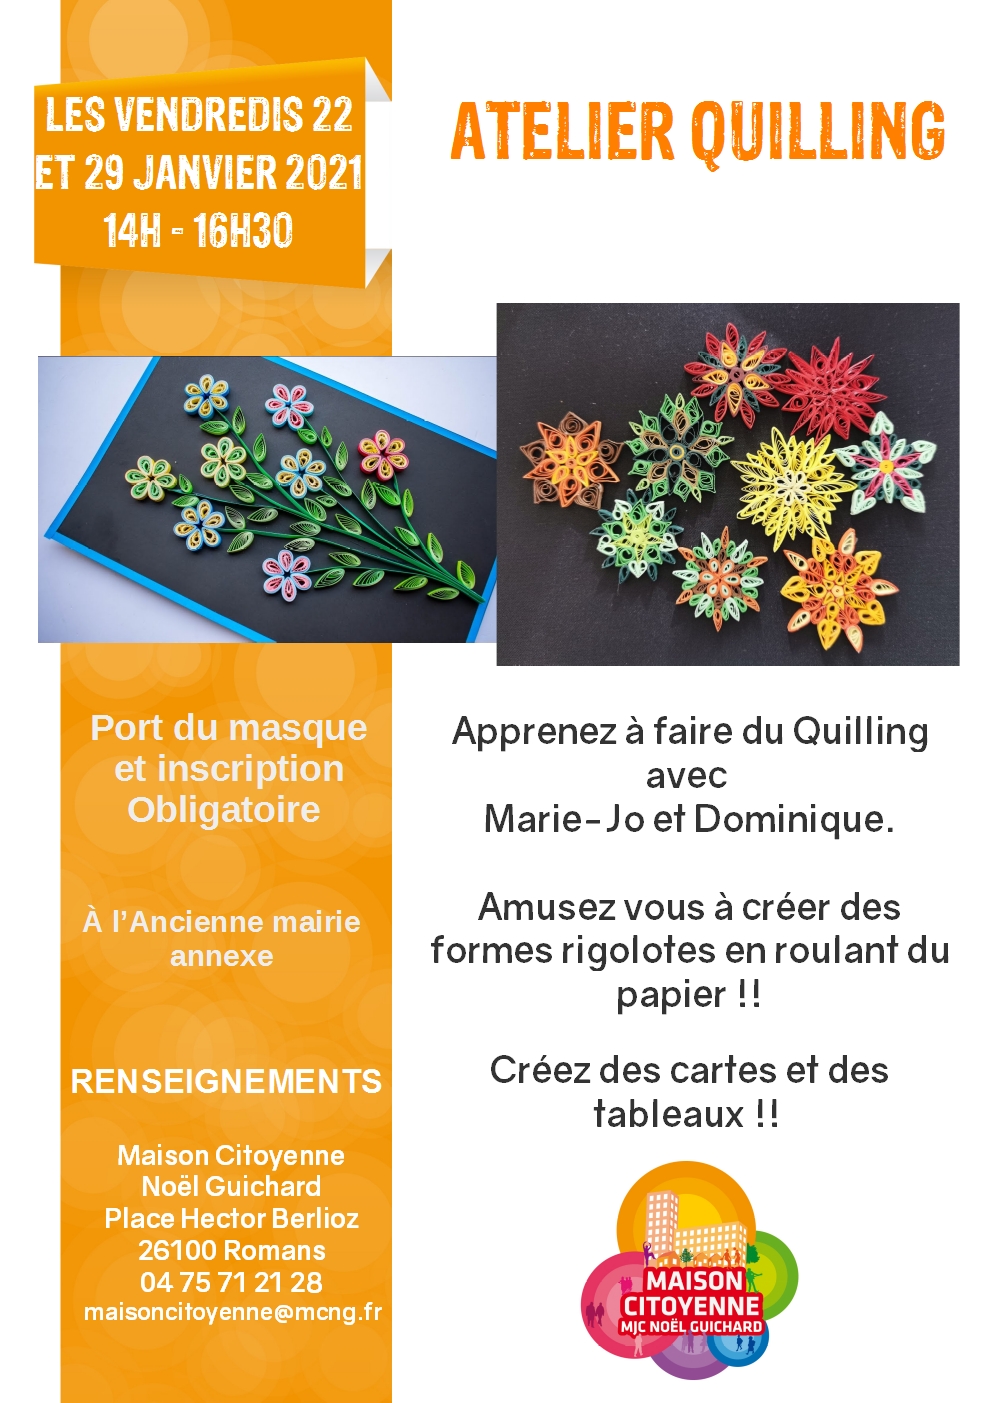 Atelier Quiling